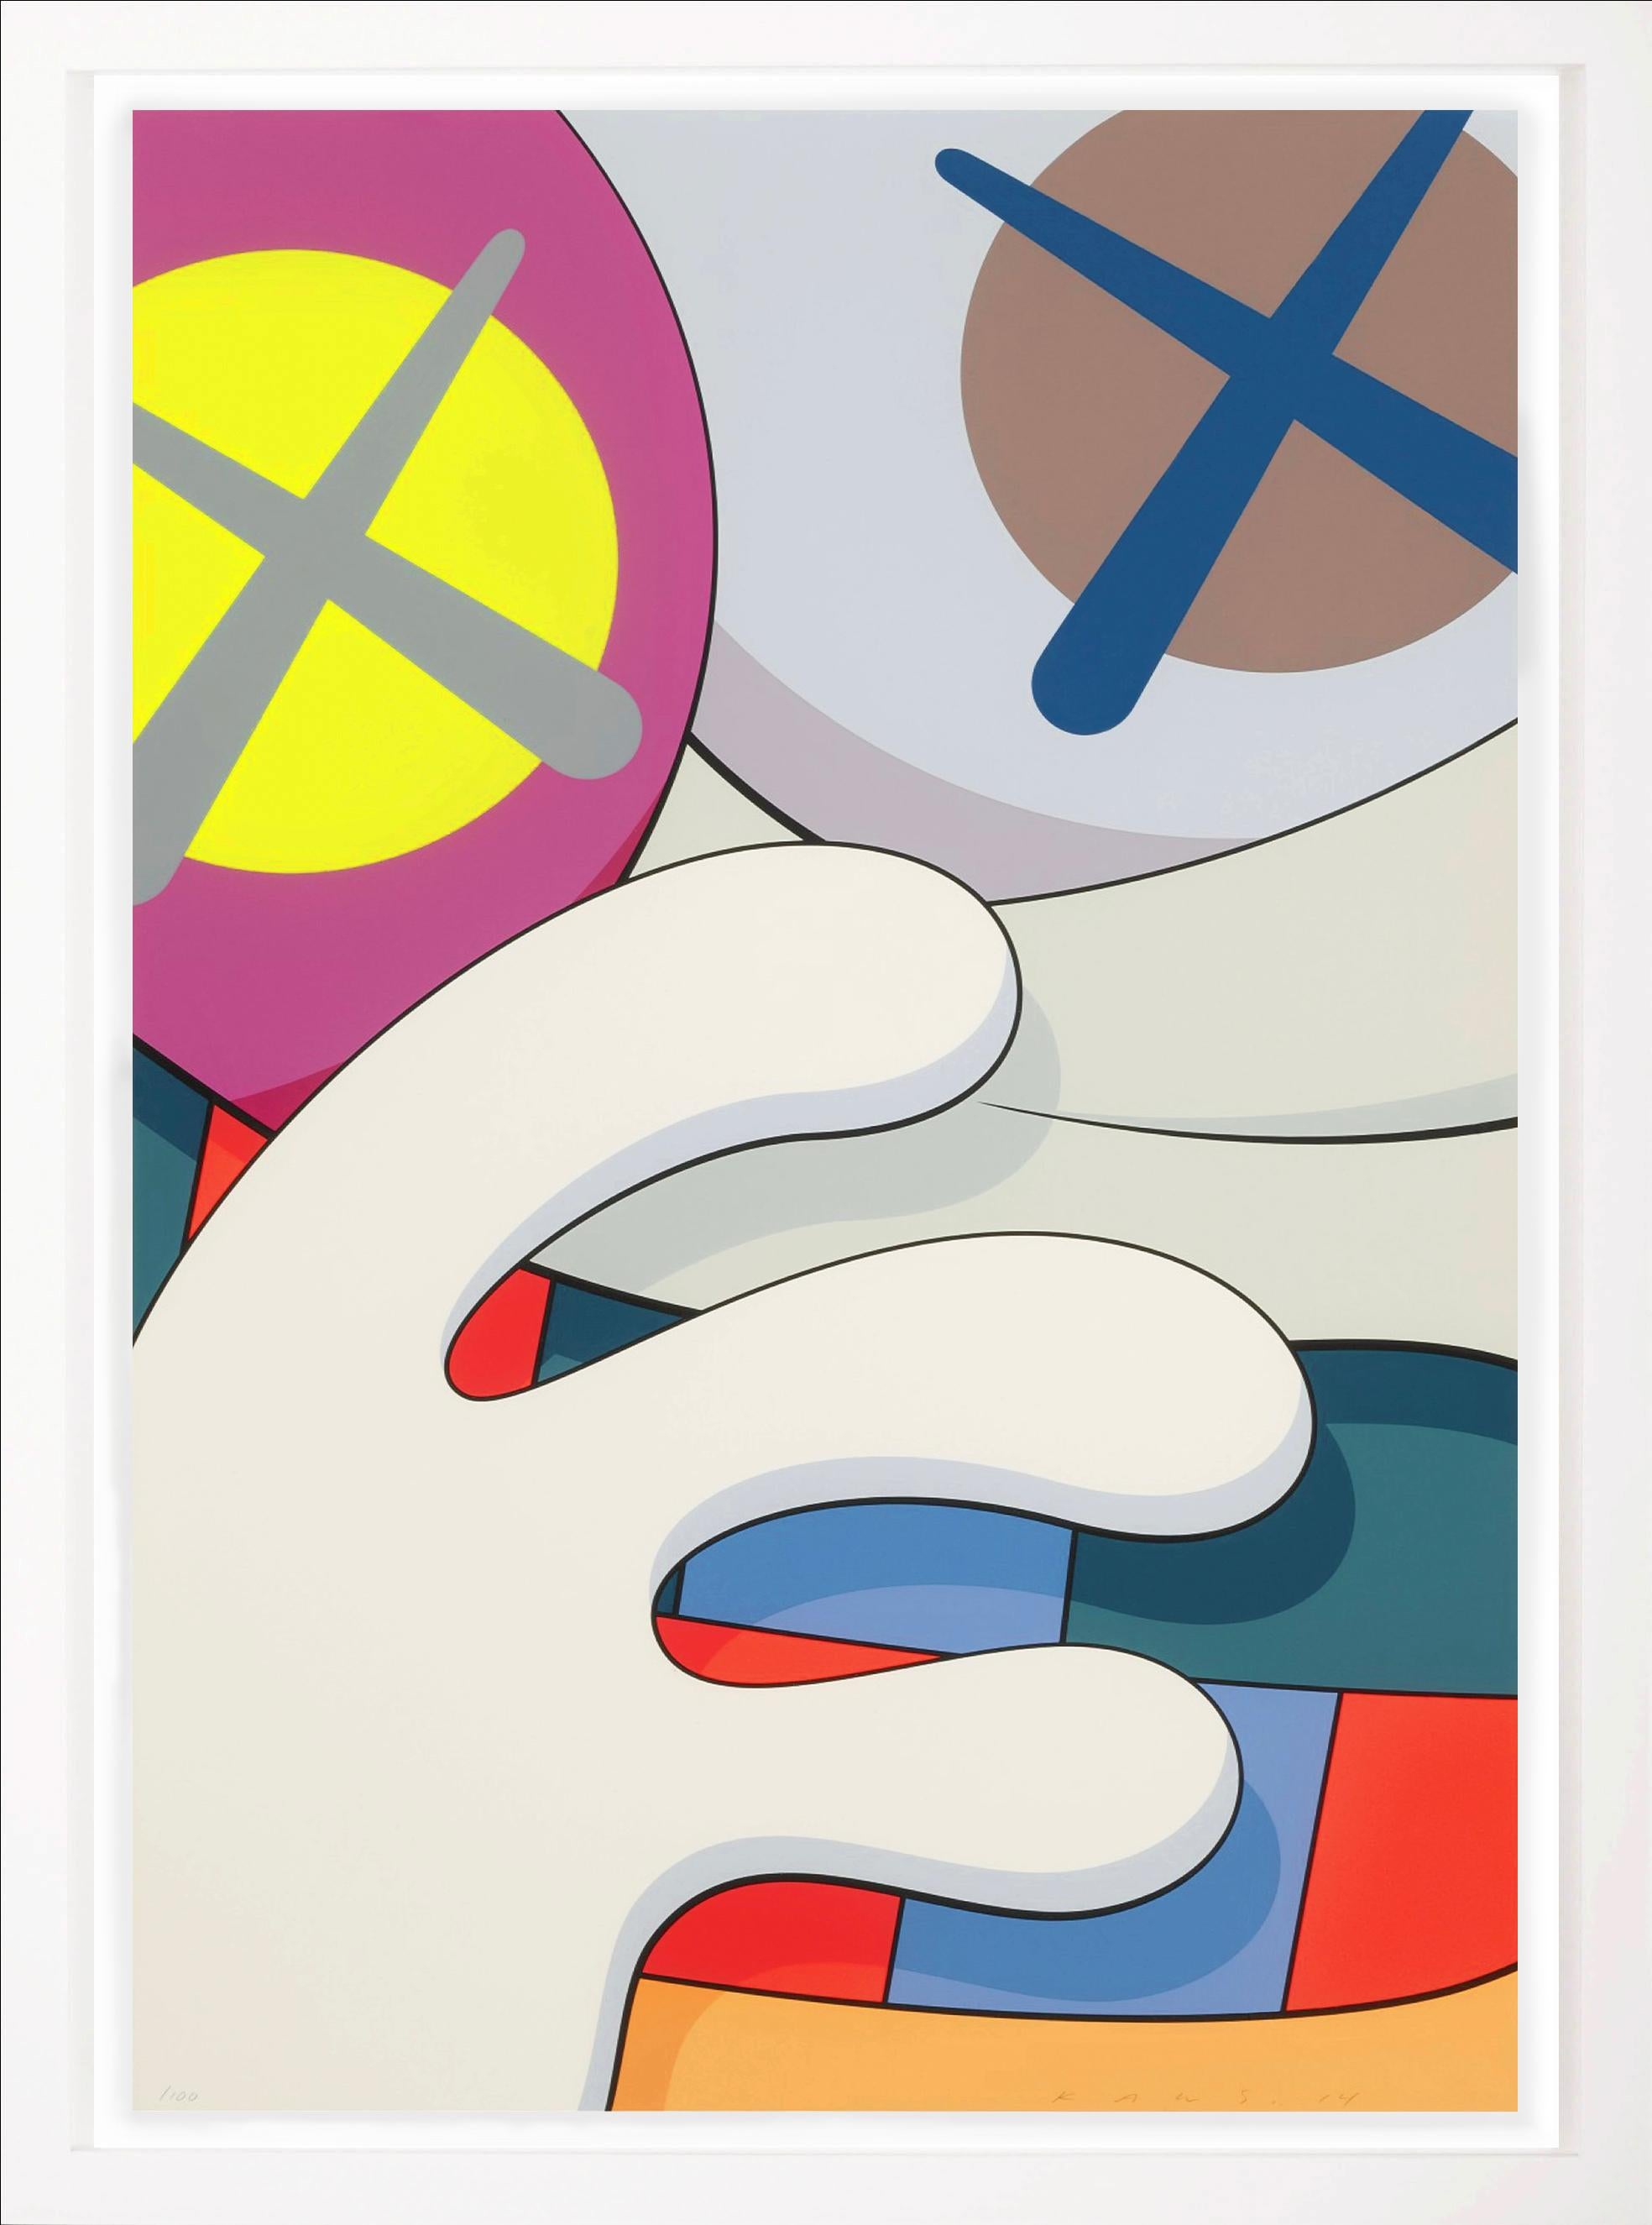 The ‘Blame Game' Portfolio by KAWS is an exceptionally rare set of ten silkscreen prints, created in 2014. The set comes framed and with the original box, each print is signed and numbered by the artist. The portfolio was created in a limited